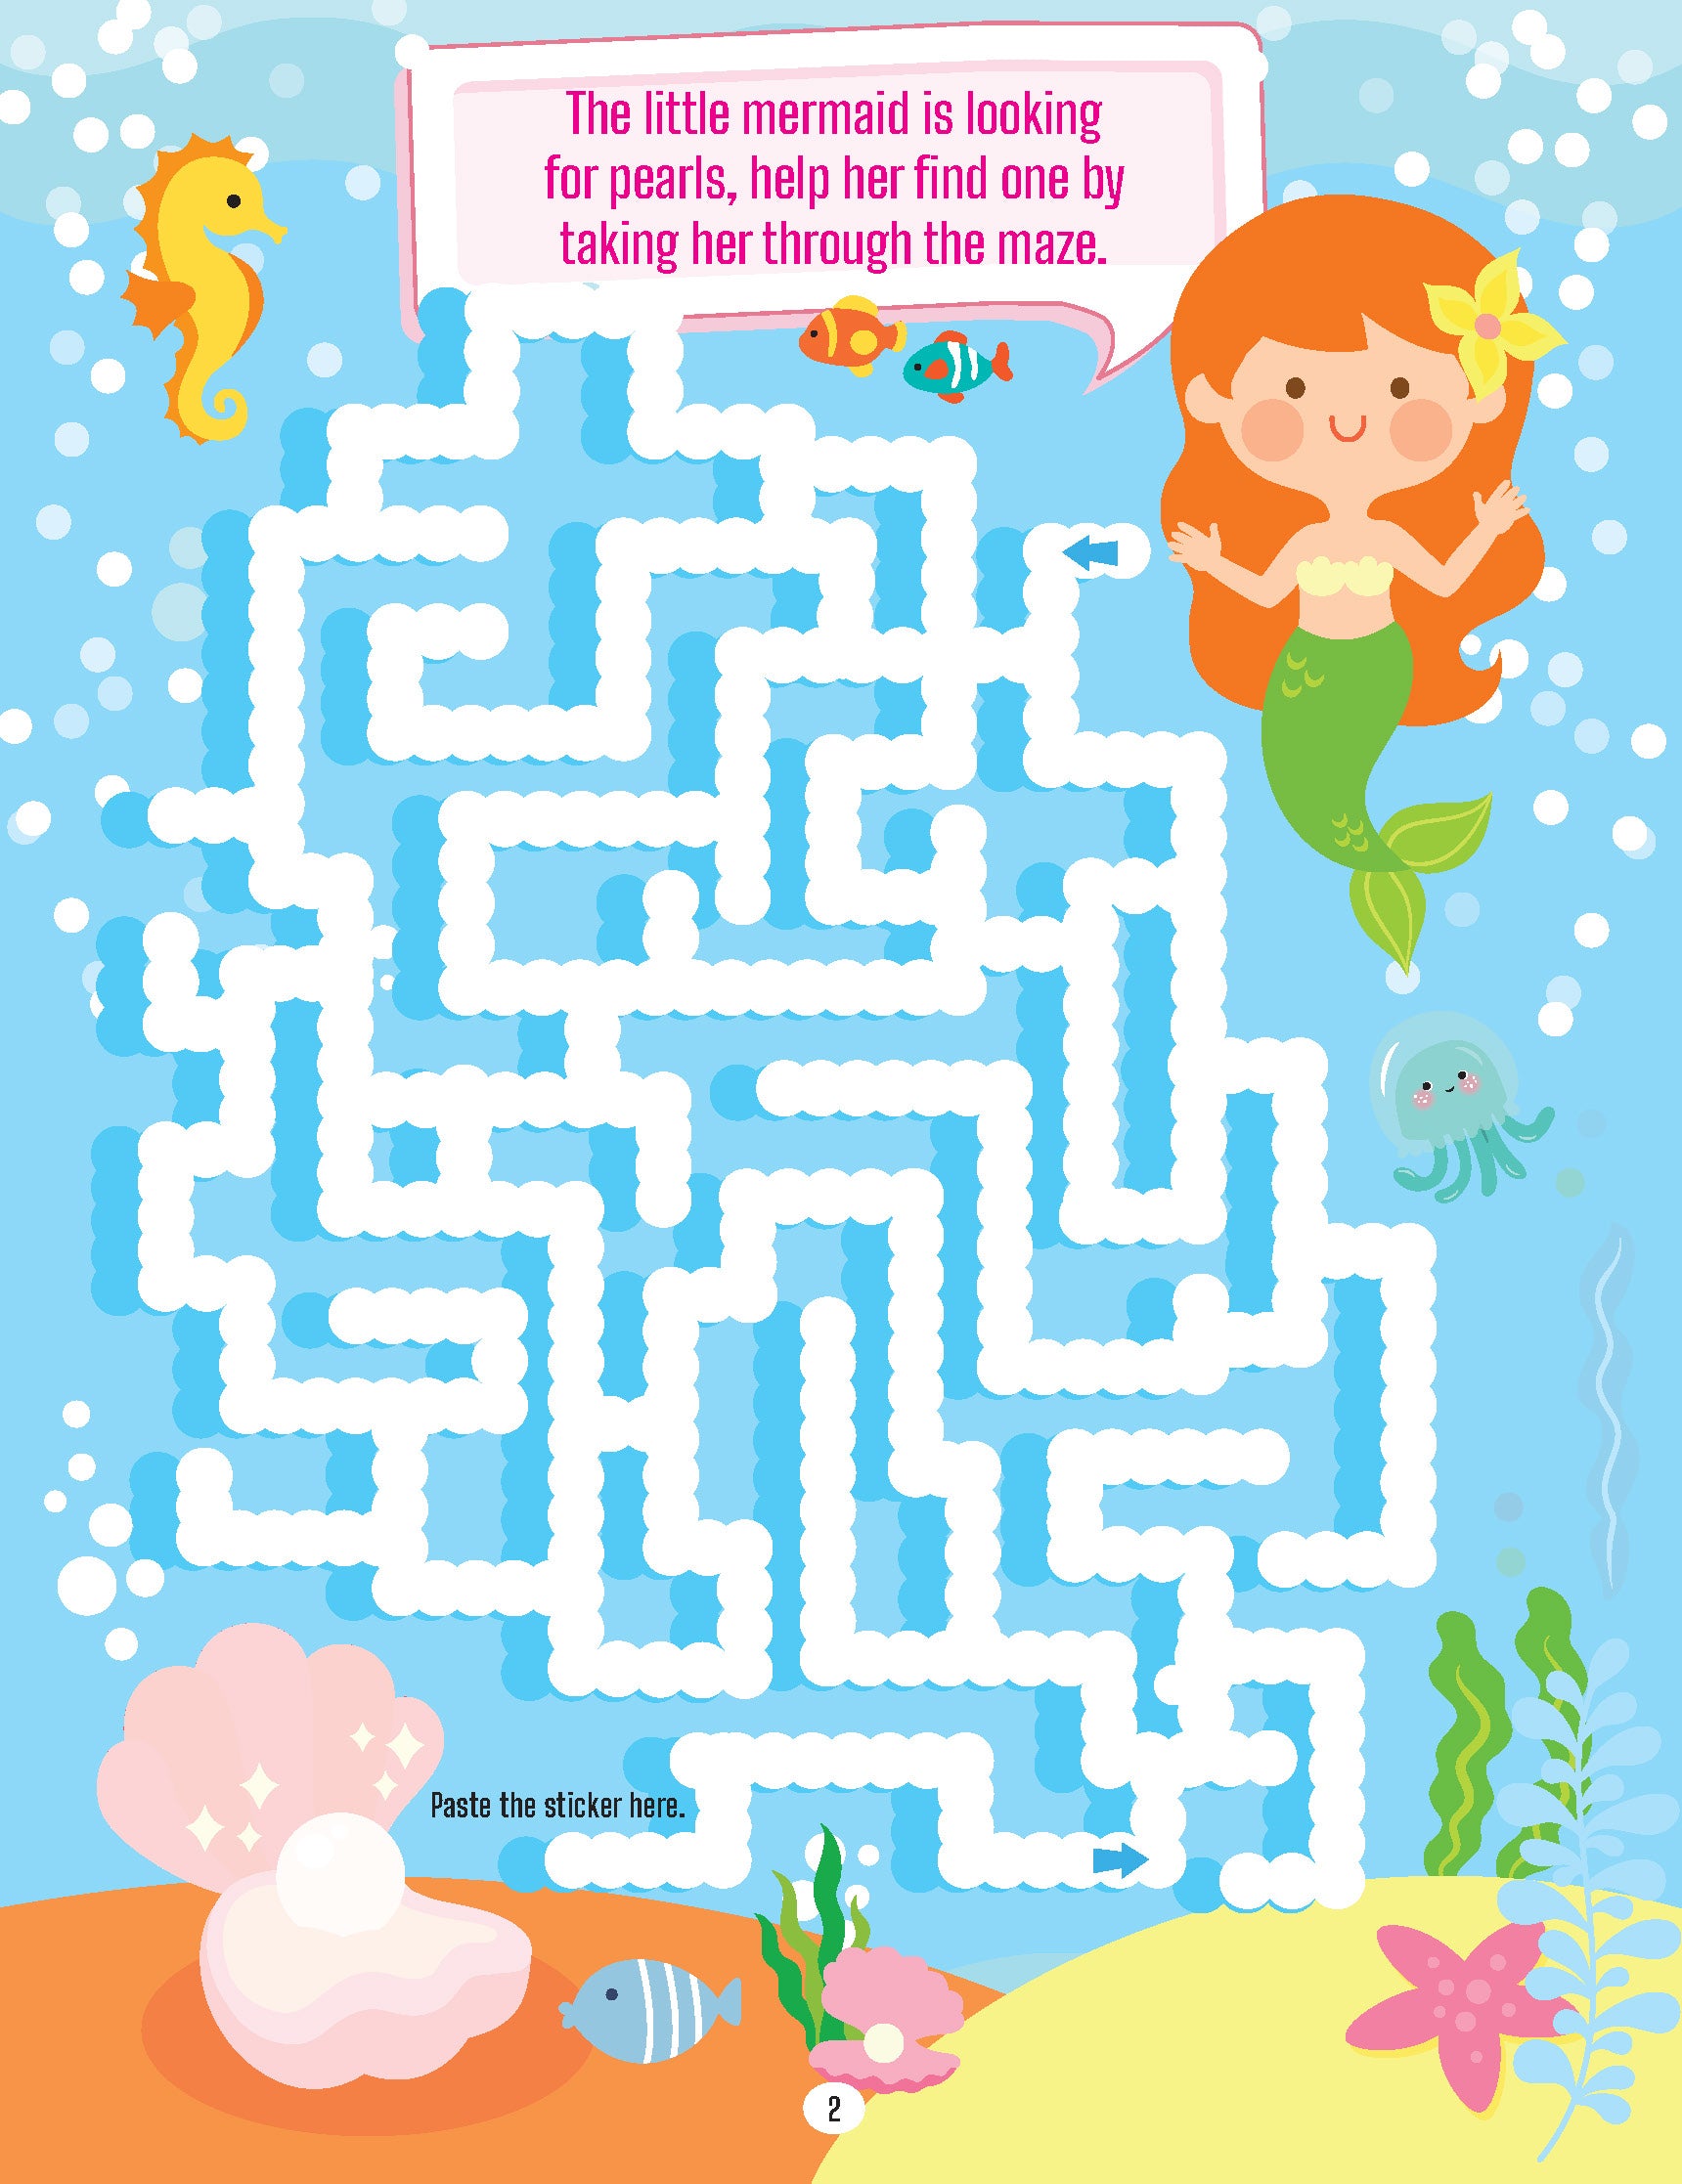 The Ultimate Maze Collection: Kids Activity Book